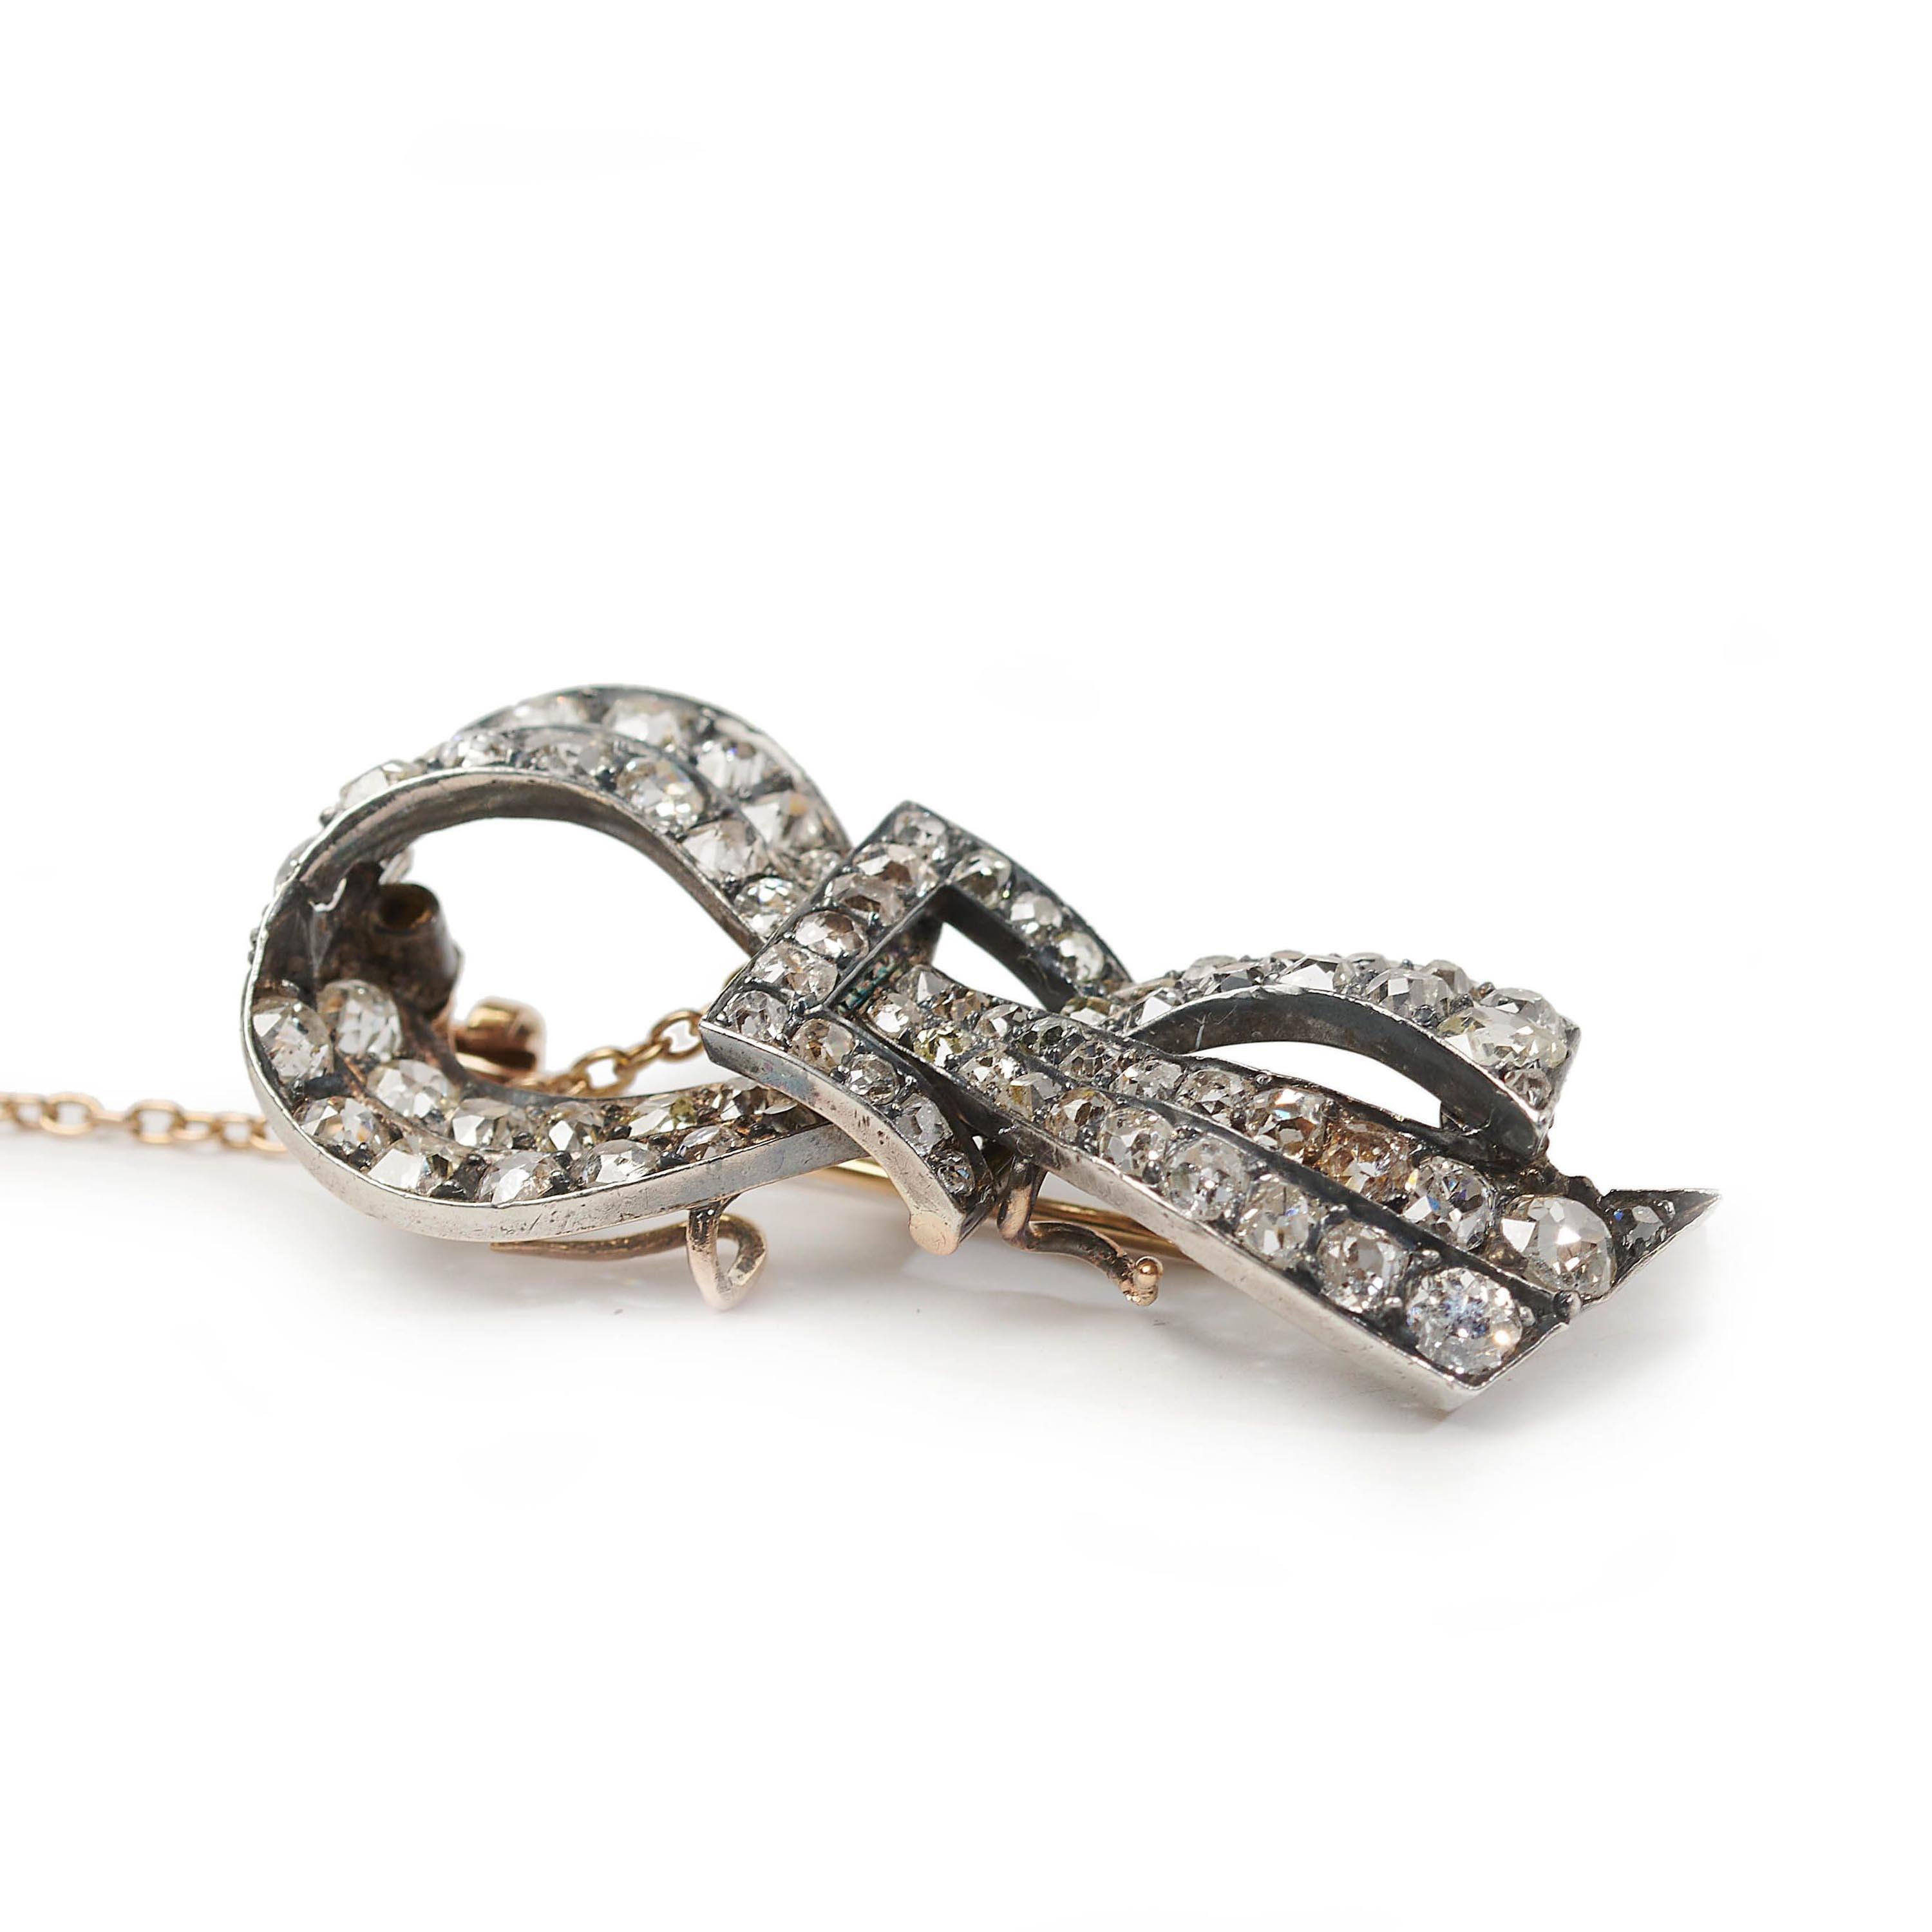 Women's French Antique Diamond and Silver Upon Gold Bow Brooch, circa 1880 For Sale